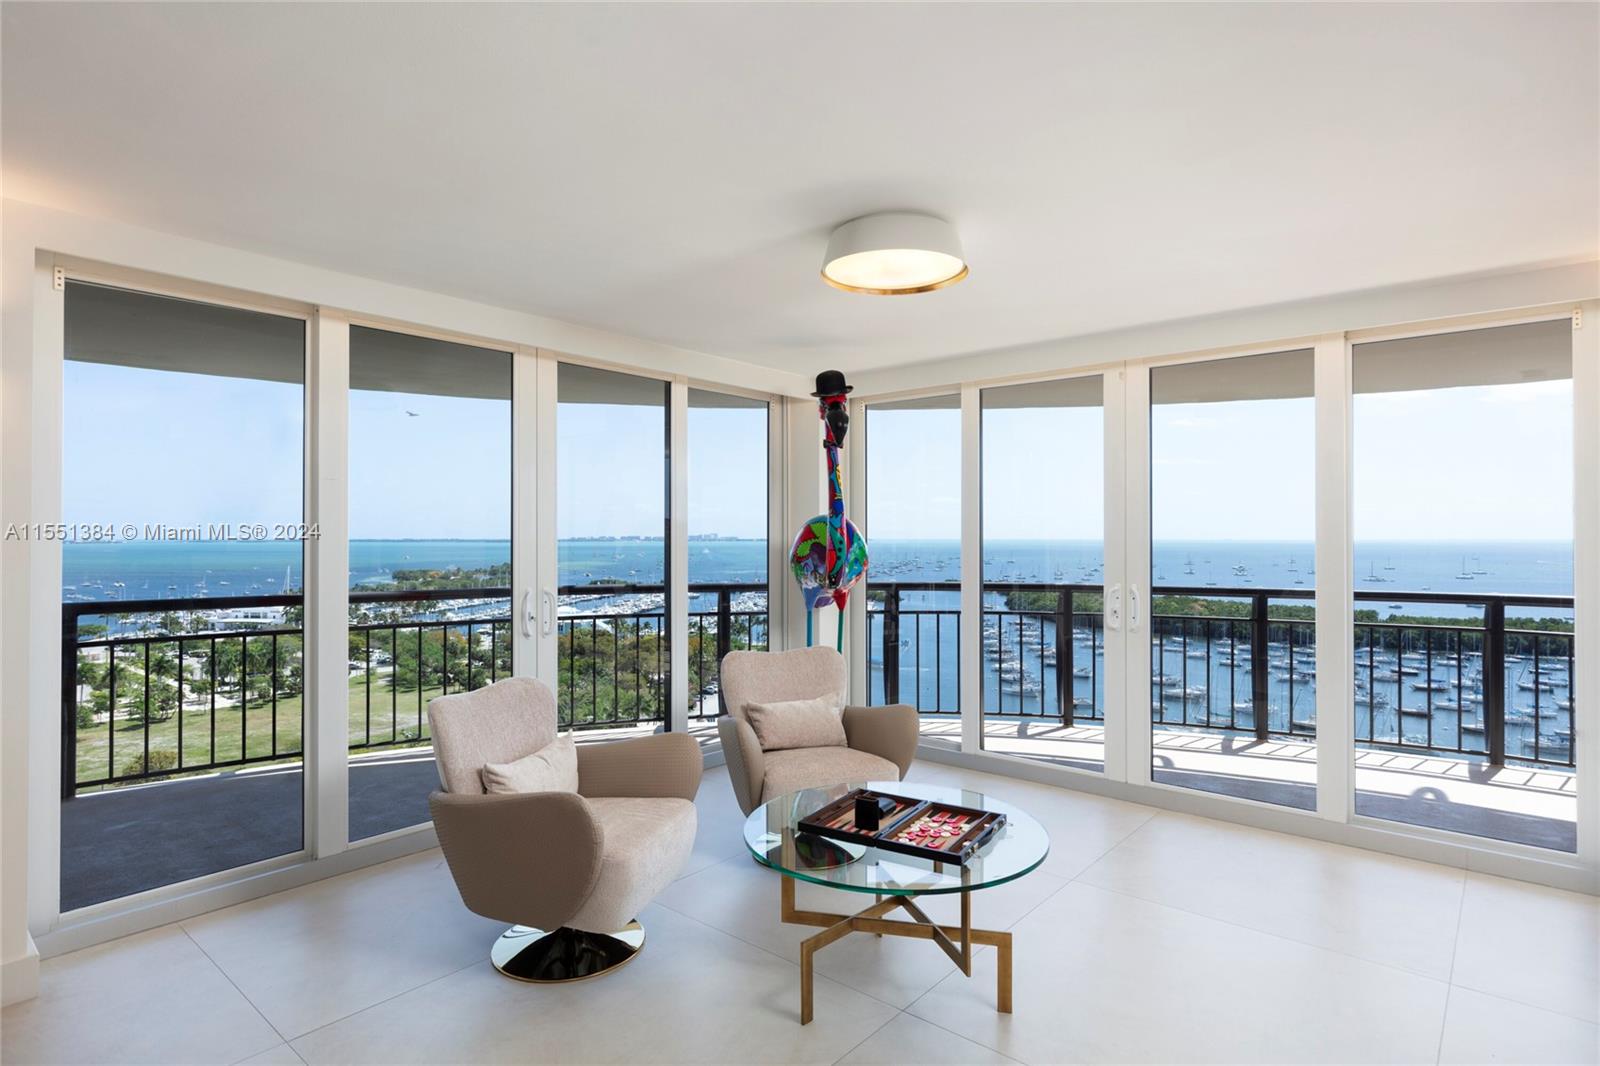 A modern haven in the sky with the most PRICELESS views in all of Coconut Grove. The 180 degrees of glass let you take in sparkling Biscayne Bay, Downtown, and Key Biscayne from every angle. With generous and thoughtful entertaining spaces including a chef’s kitchen with full bar and seating, wraparound balconies, dining room with video wall, and game area, your guests will be dazzled by more than just the vistas. Enjoy unparalleled walkability to center Coconut Grove and its dining and shopping. Amenities come up to you with private gym, sauna, steam room, and jacuzzi. When you’re ready for relaxation, retreat to a primary suite with two walk-in closets and striking stone wet room with freestanding tub and double shower. Large in-unit storage room plus six assigned parking spaces.